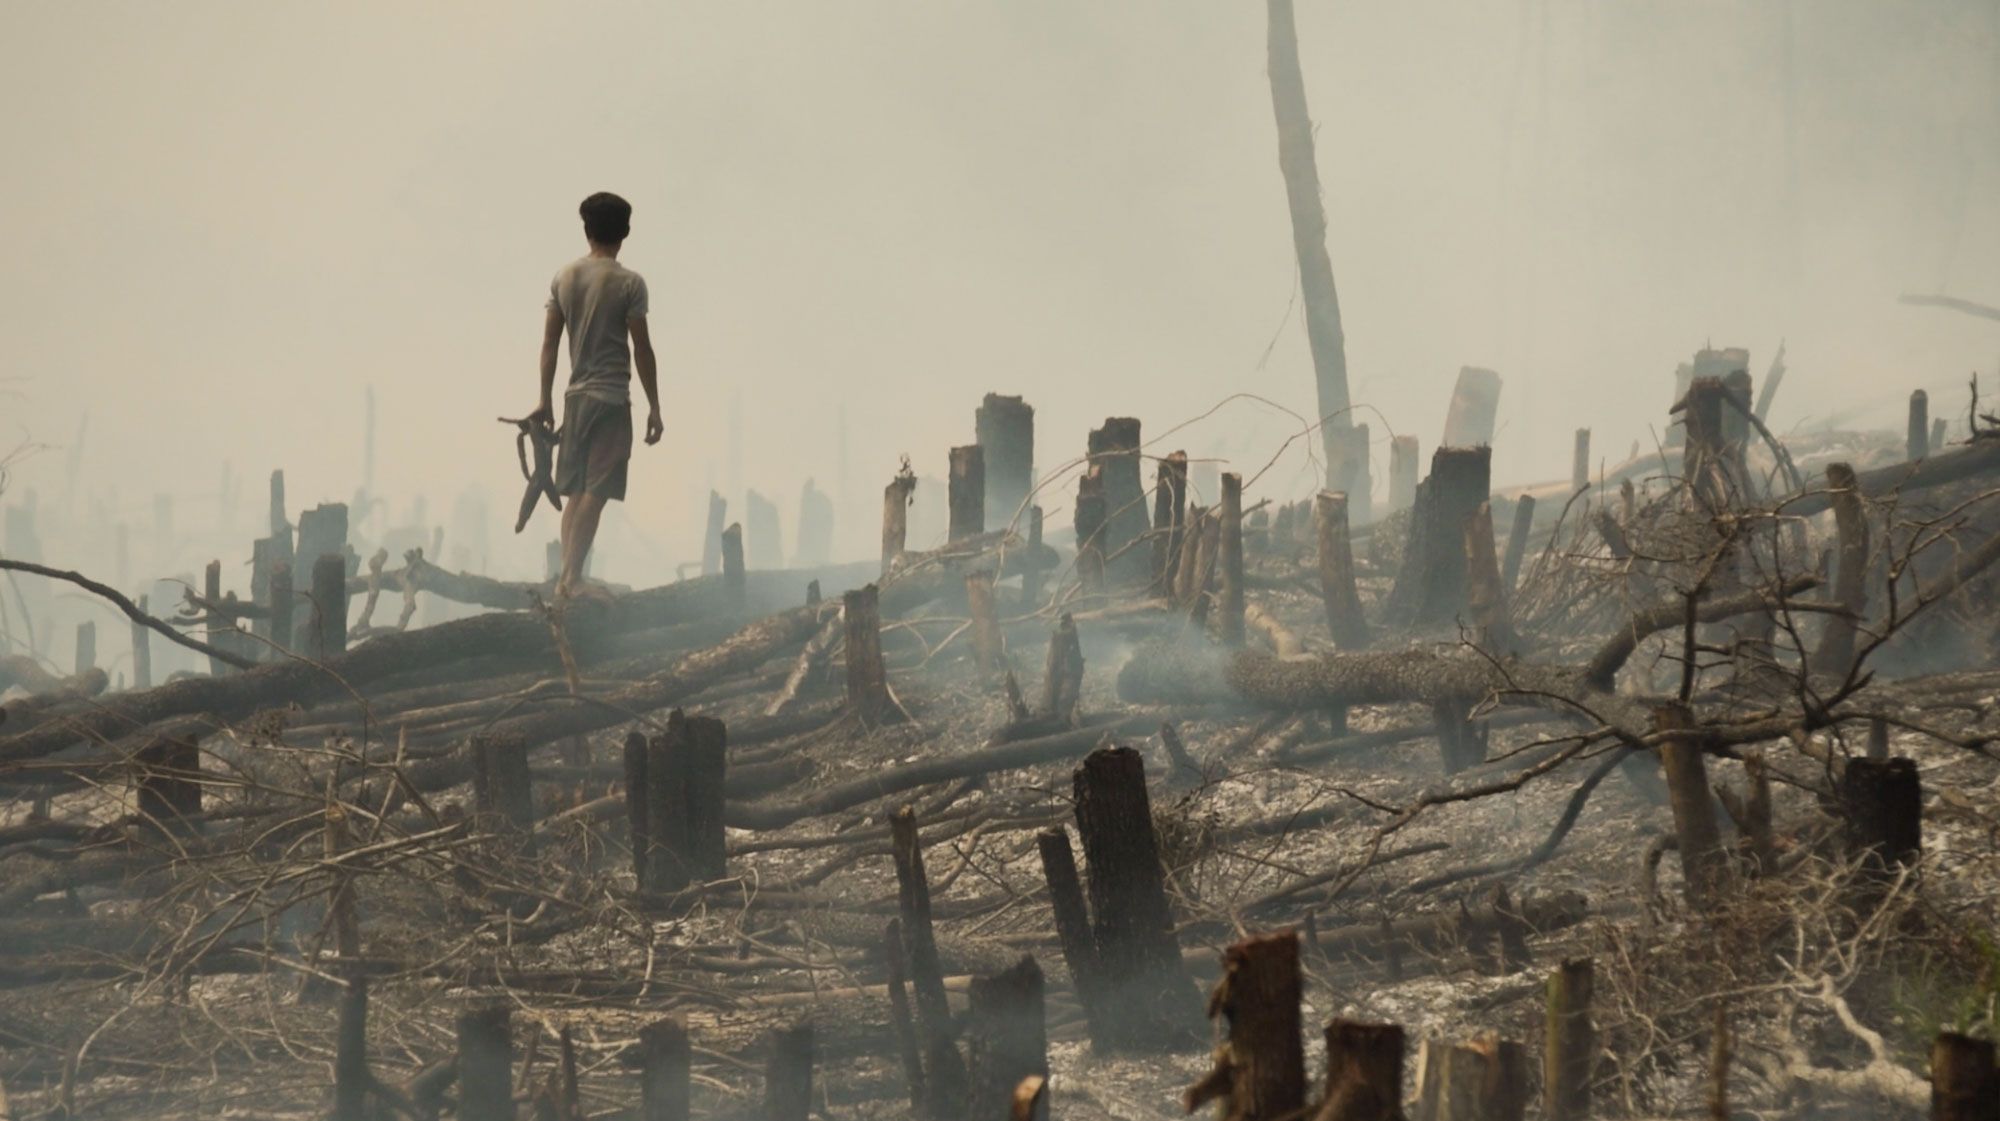 Throughout West Kalimantan swidden or “slash and burn” techniques are used to clear land in preparation for planting corn, spinach, and pumpkins